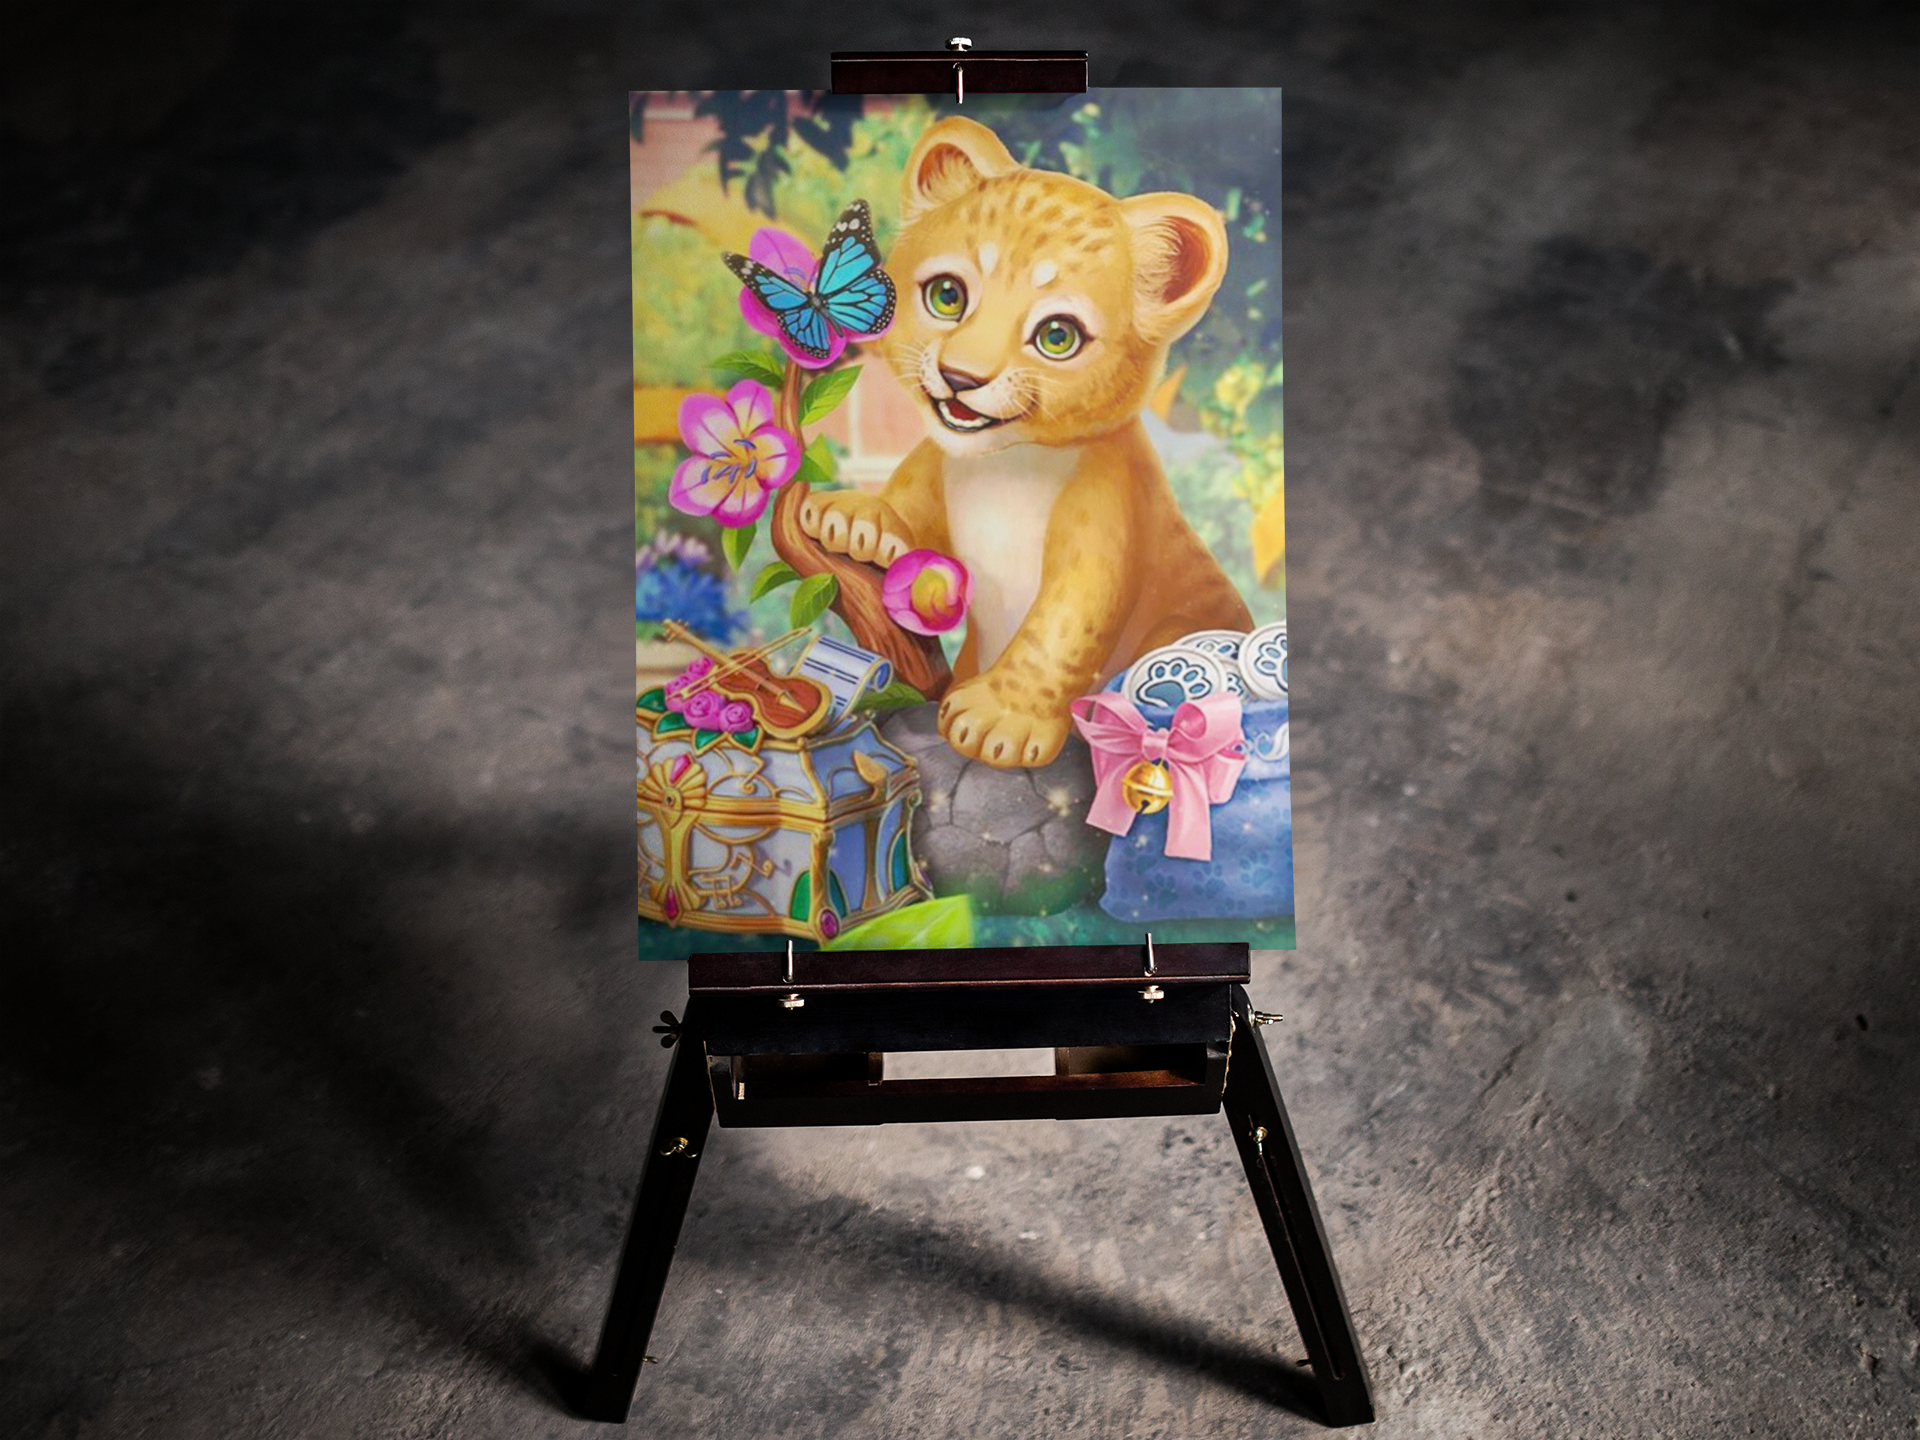 Baby Cub Playing With a Butterfly 5D Diamond Art Kit